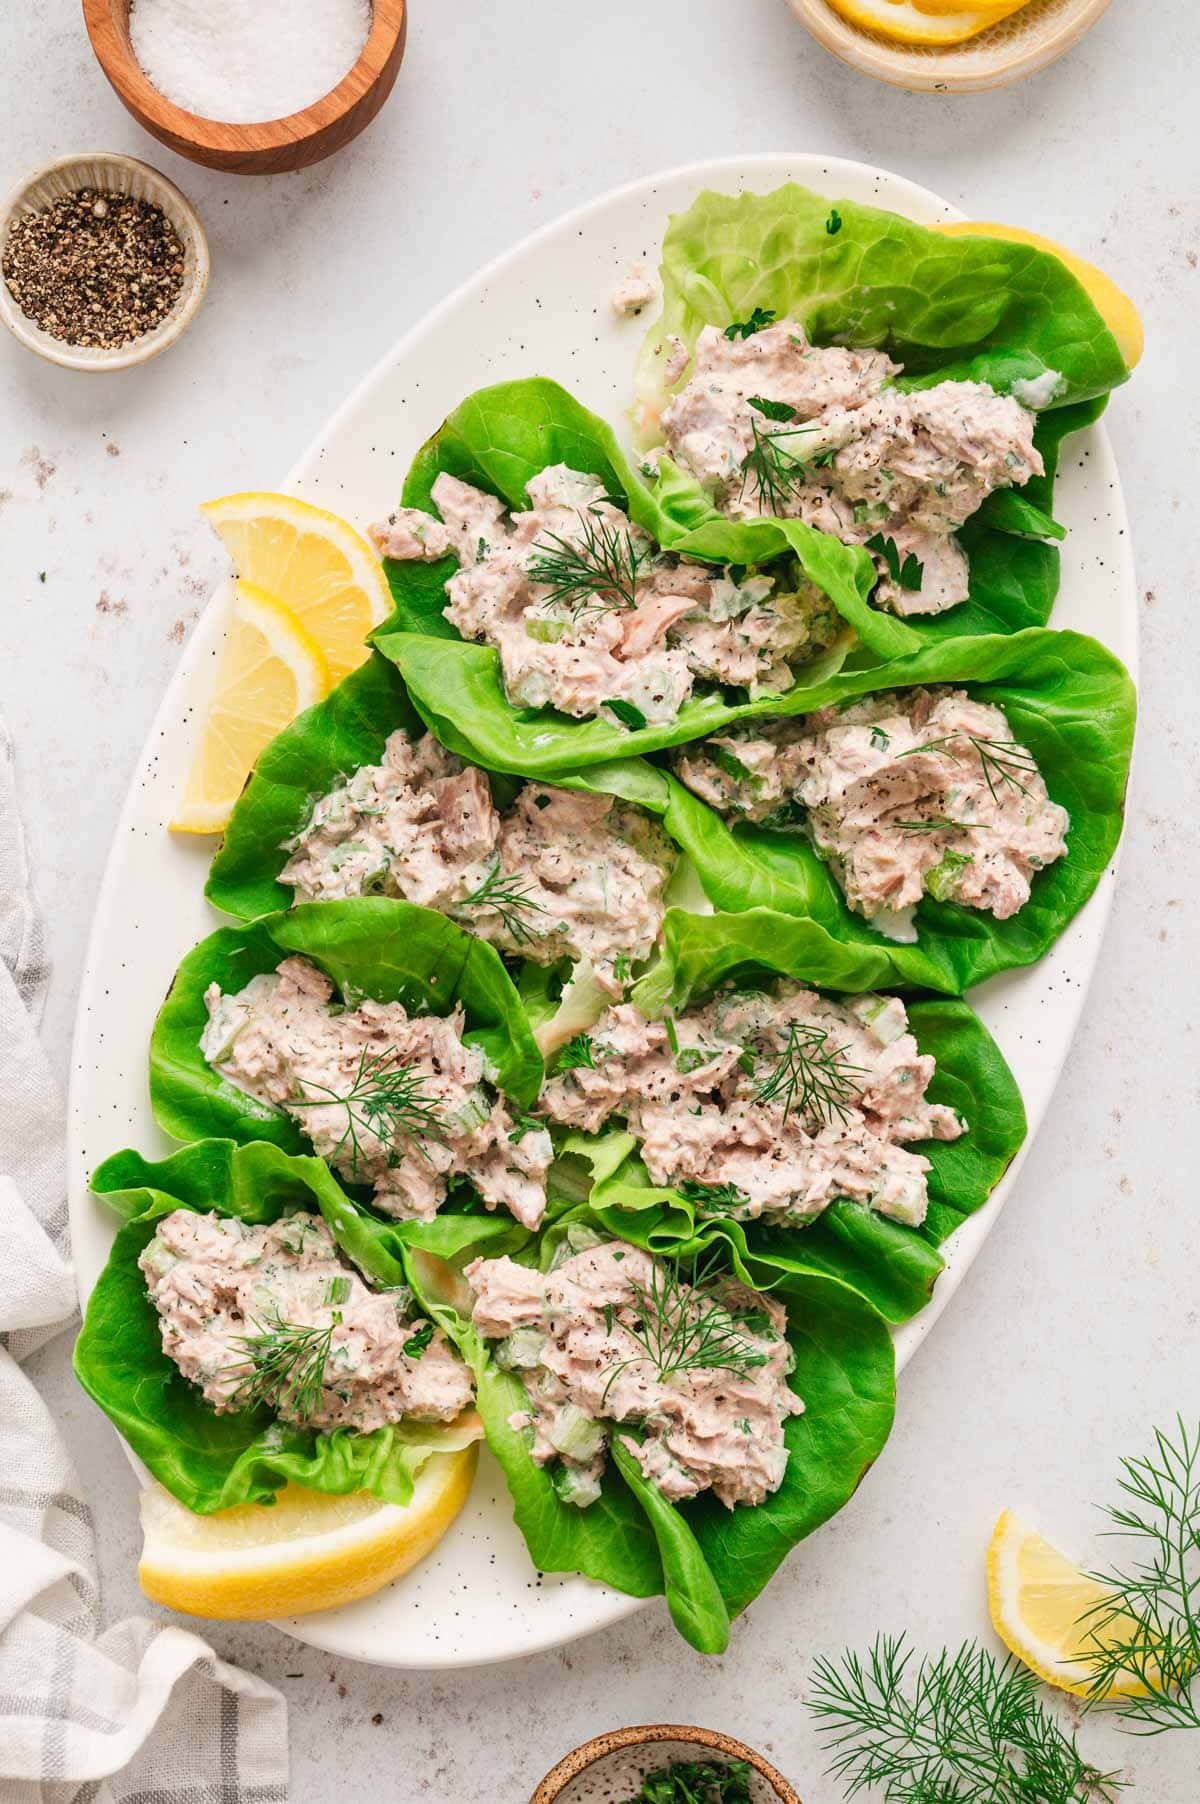 Tuna salad in lettuce cups served on a white platter.